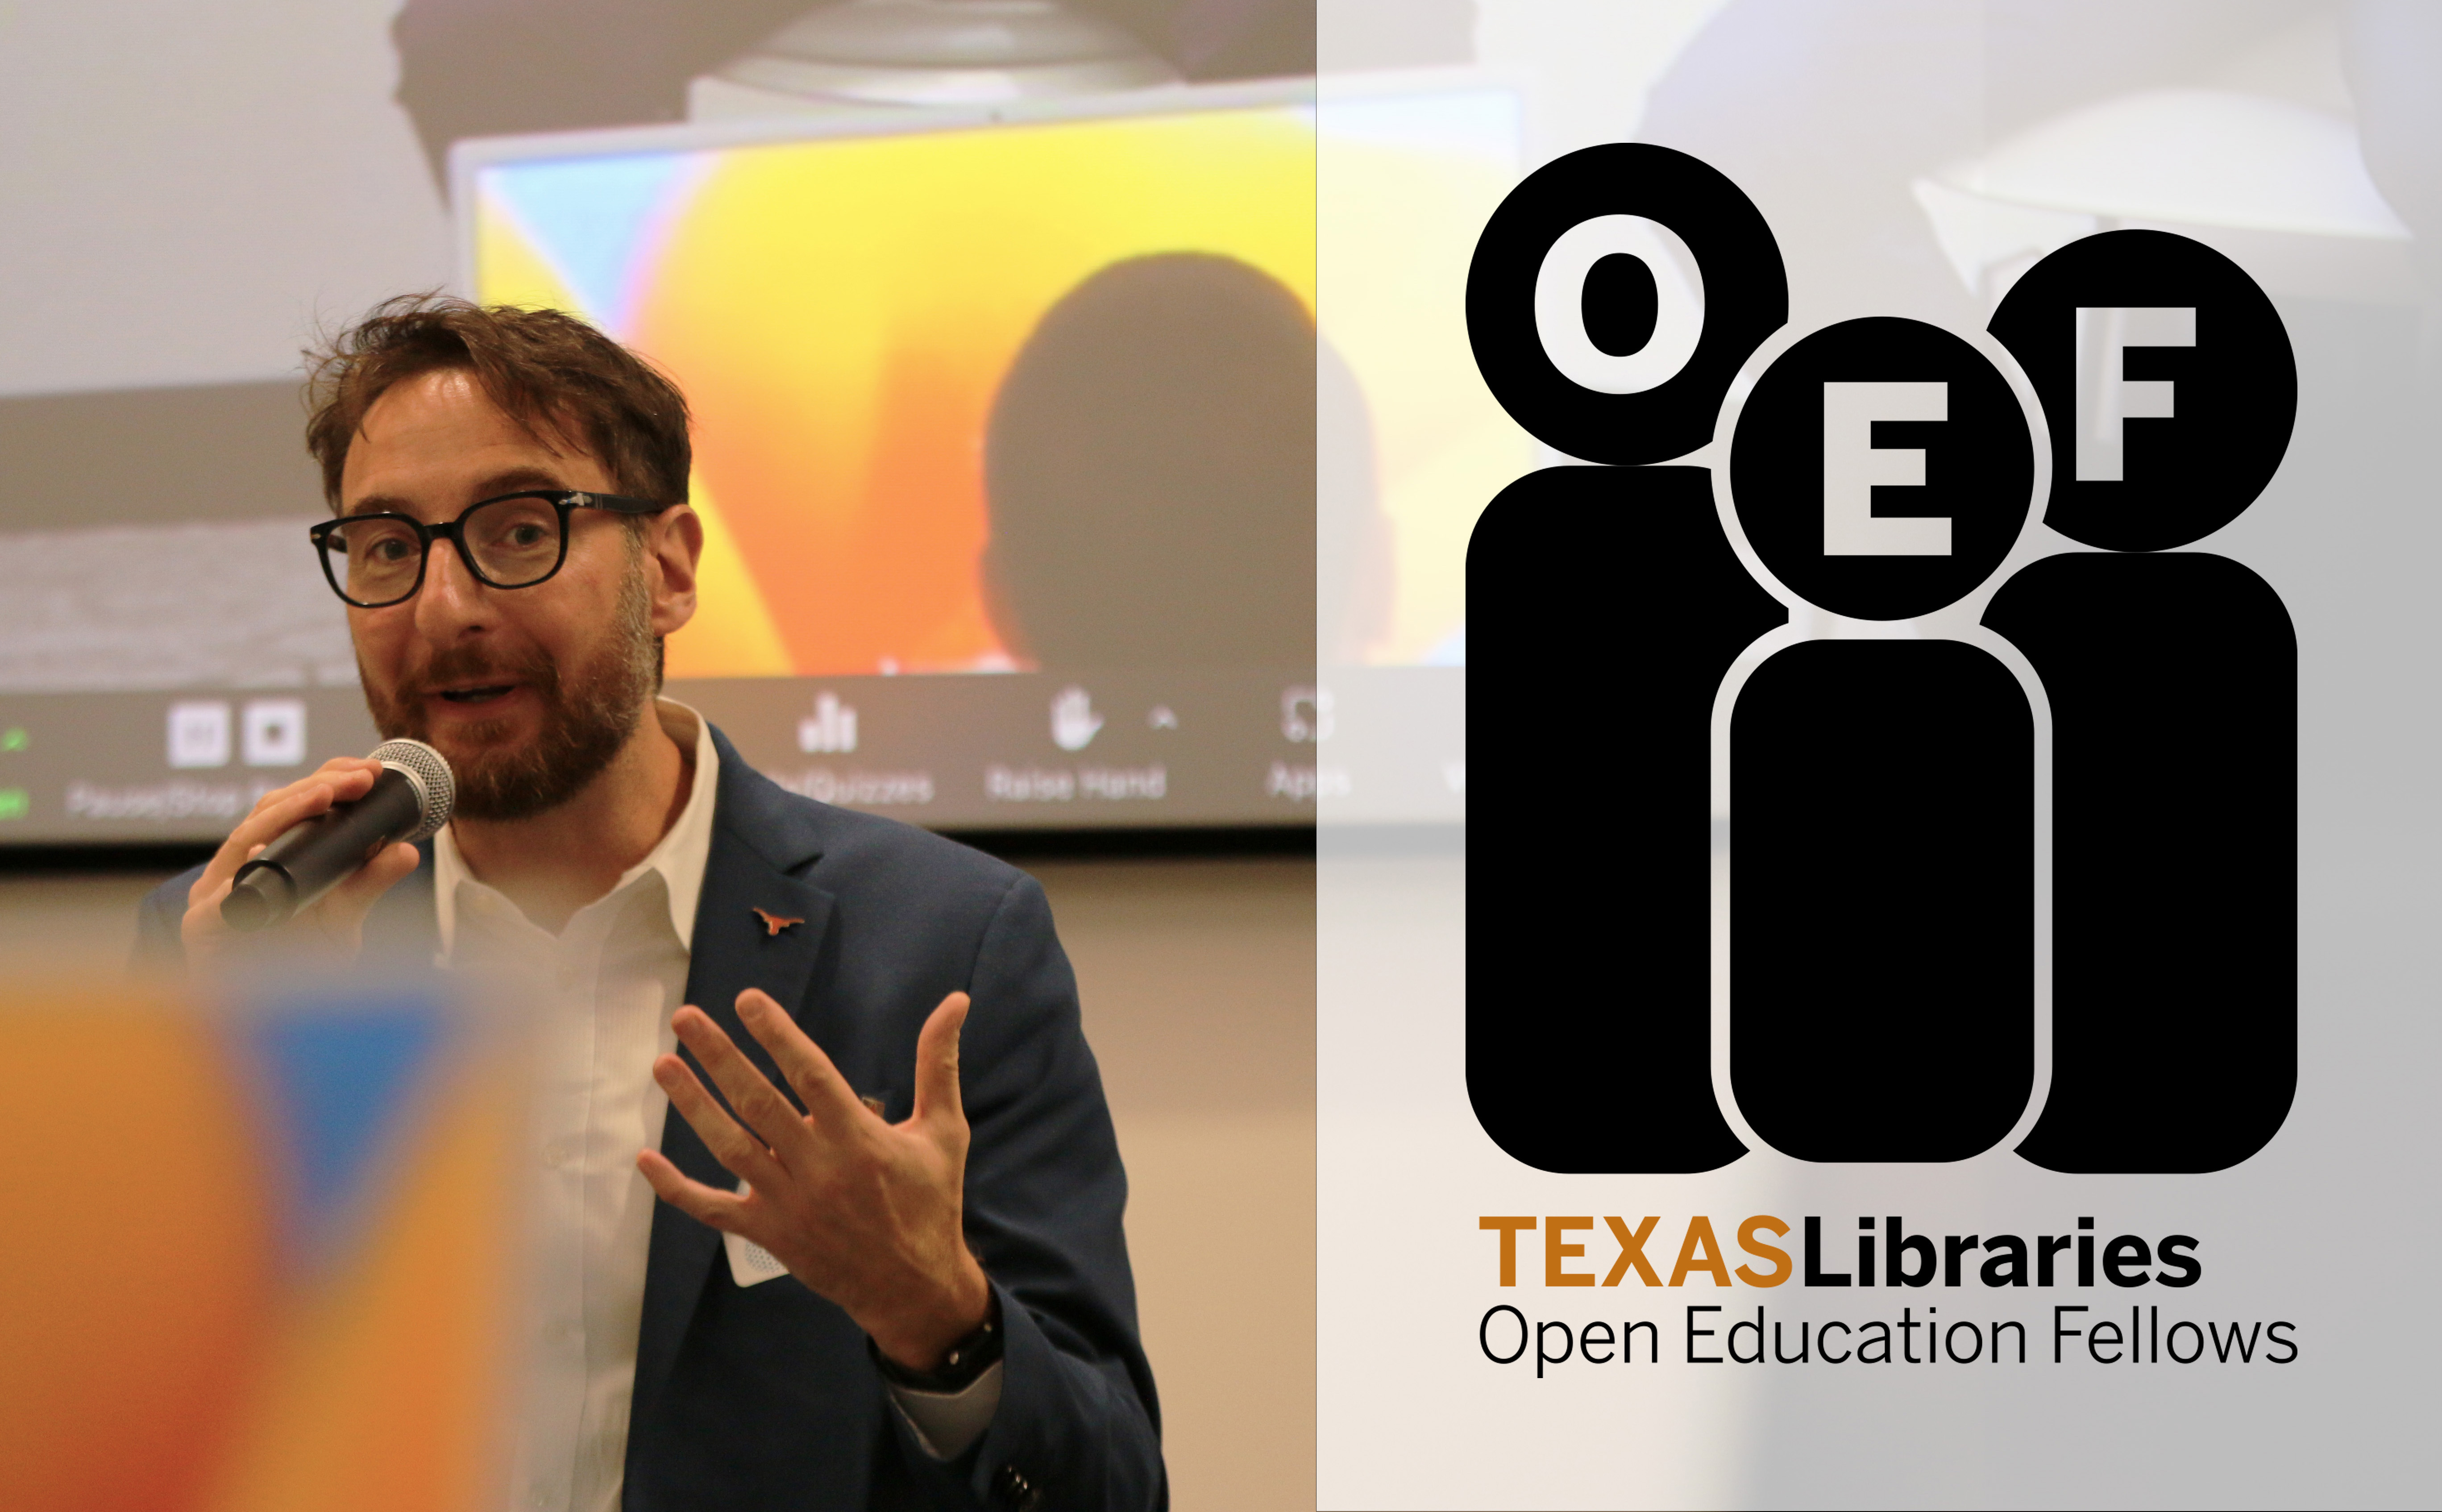 Image of current fellow Dr. Franco Pestilli talking at an open science event with the open educational fellows graphic overlaid on an opaque white field to the right of the image.